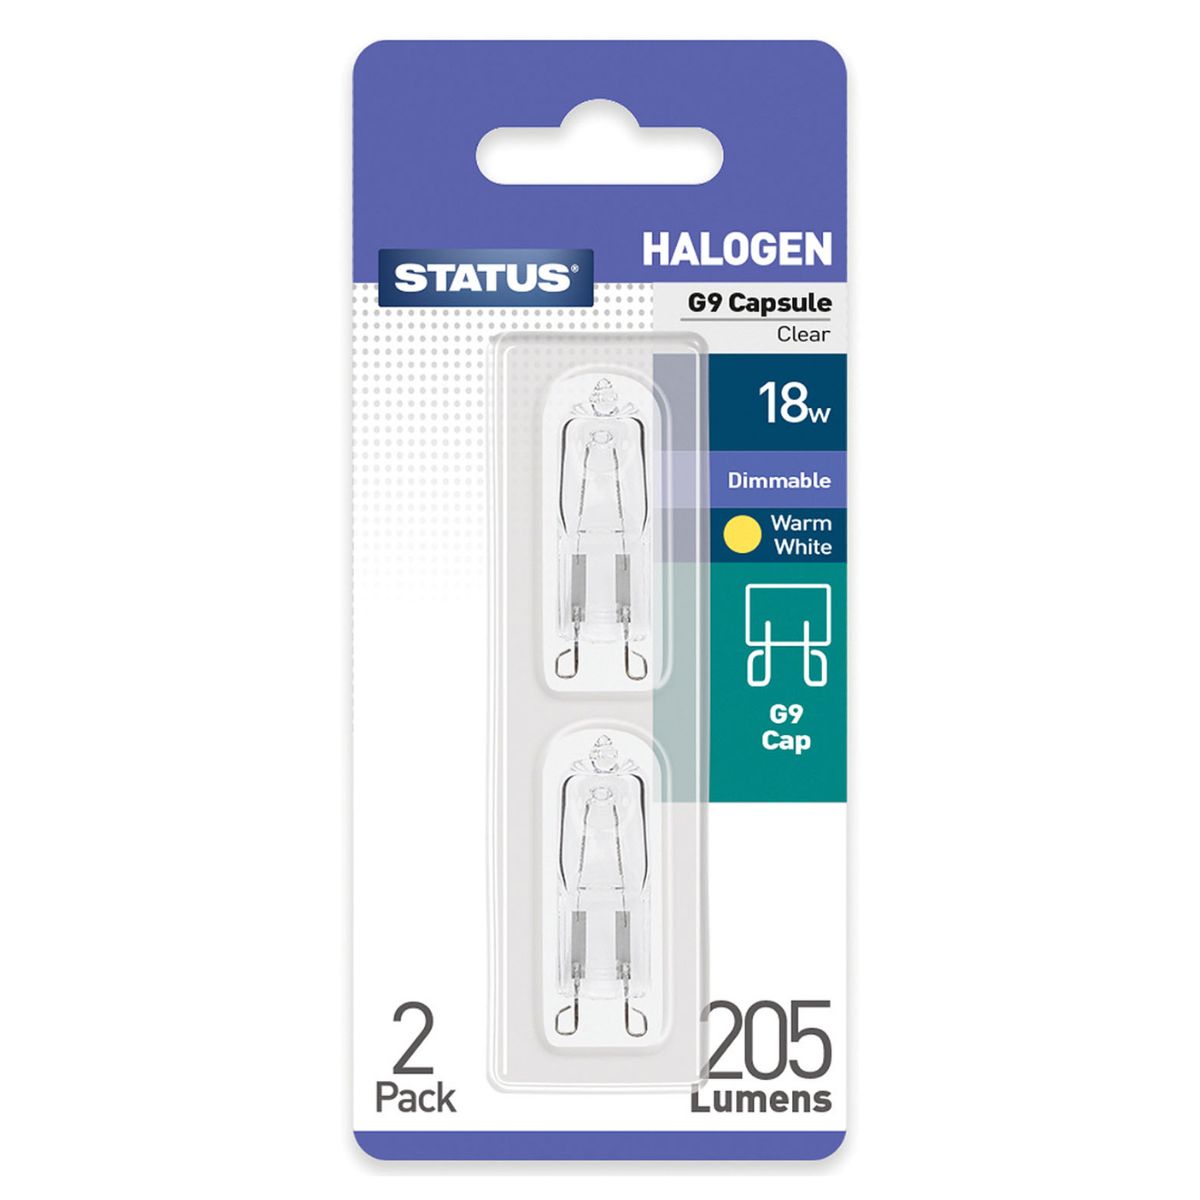 Packaging of a Status - G9 18 Watt Halogen Capsule Light Bulb - 2pcs with a clear finish, providing a warm white light output of 205 lumens.